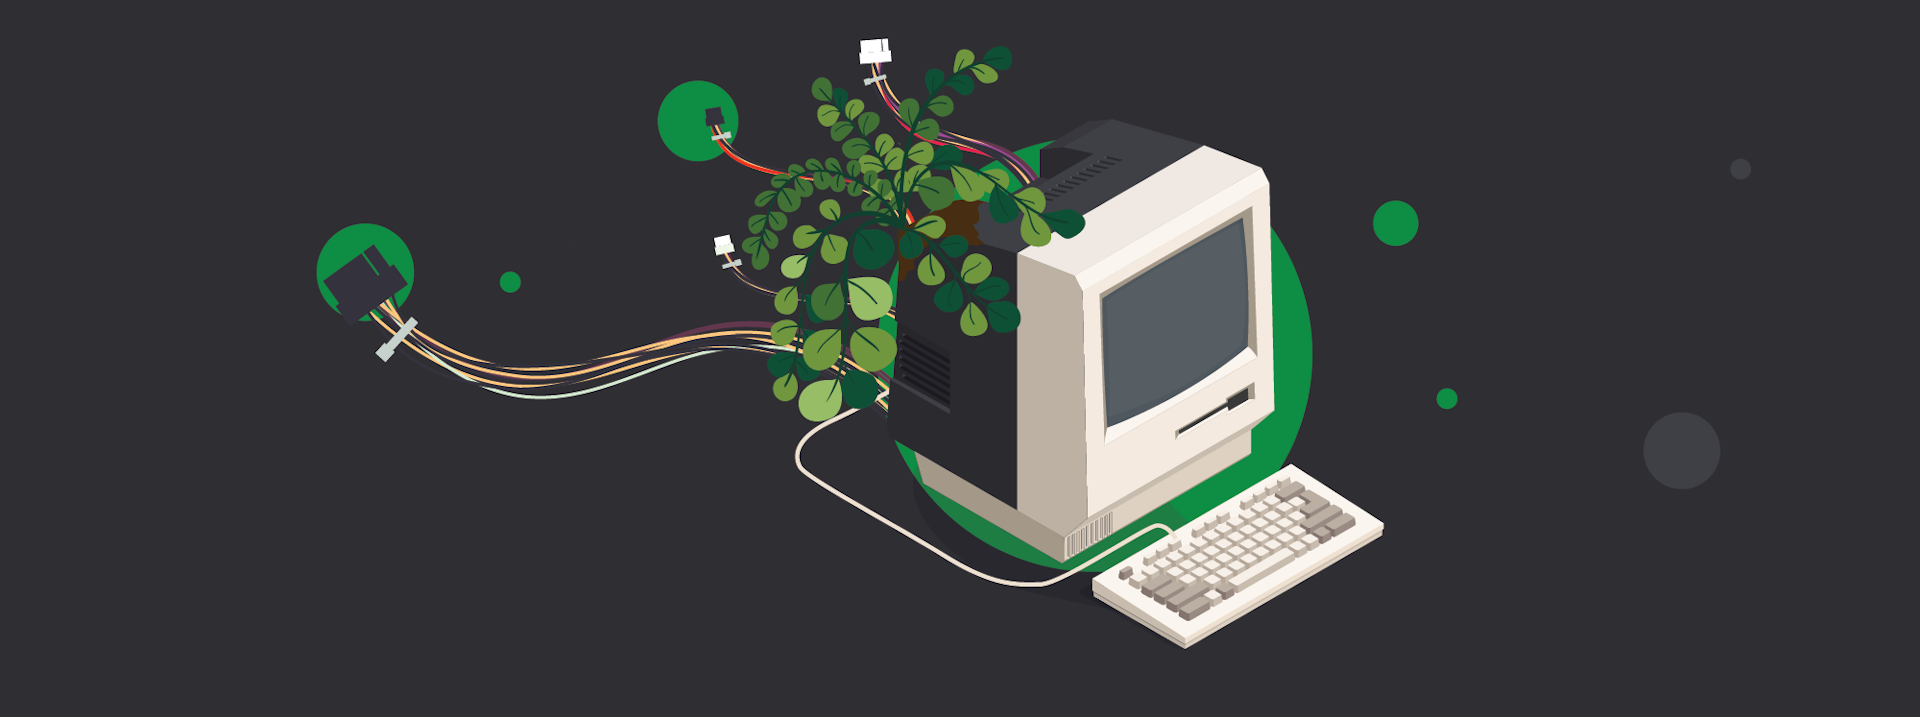 A computer with a small plant growing from it.  